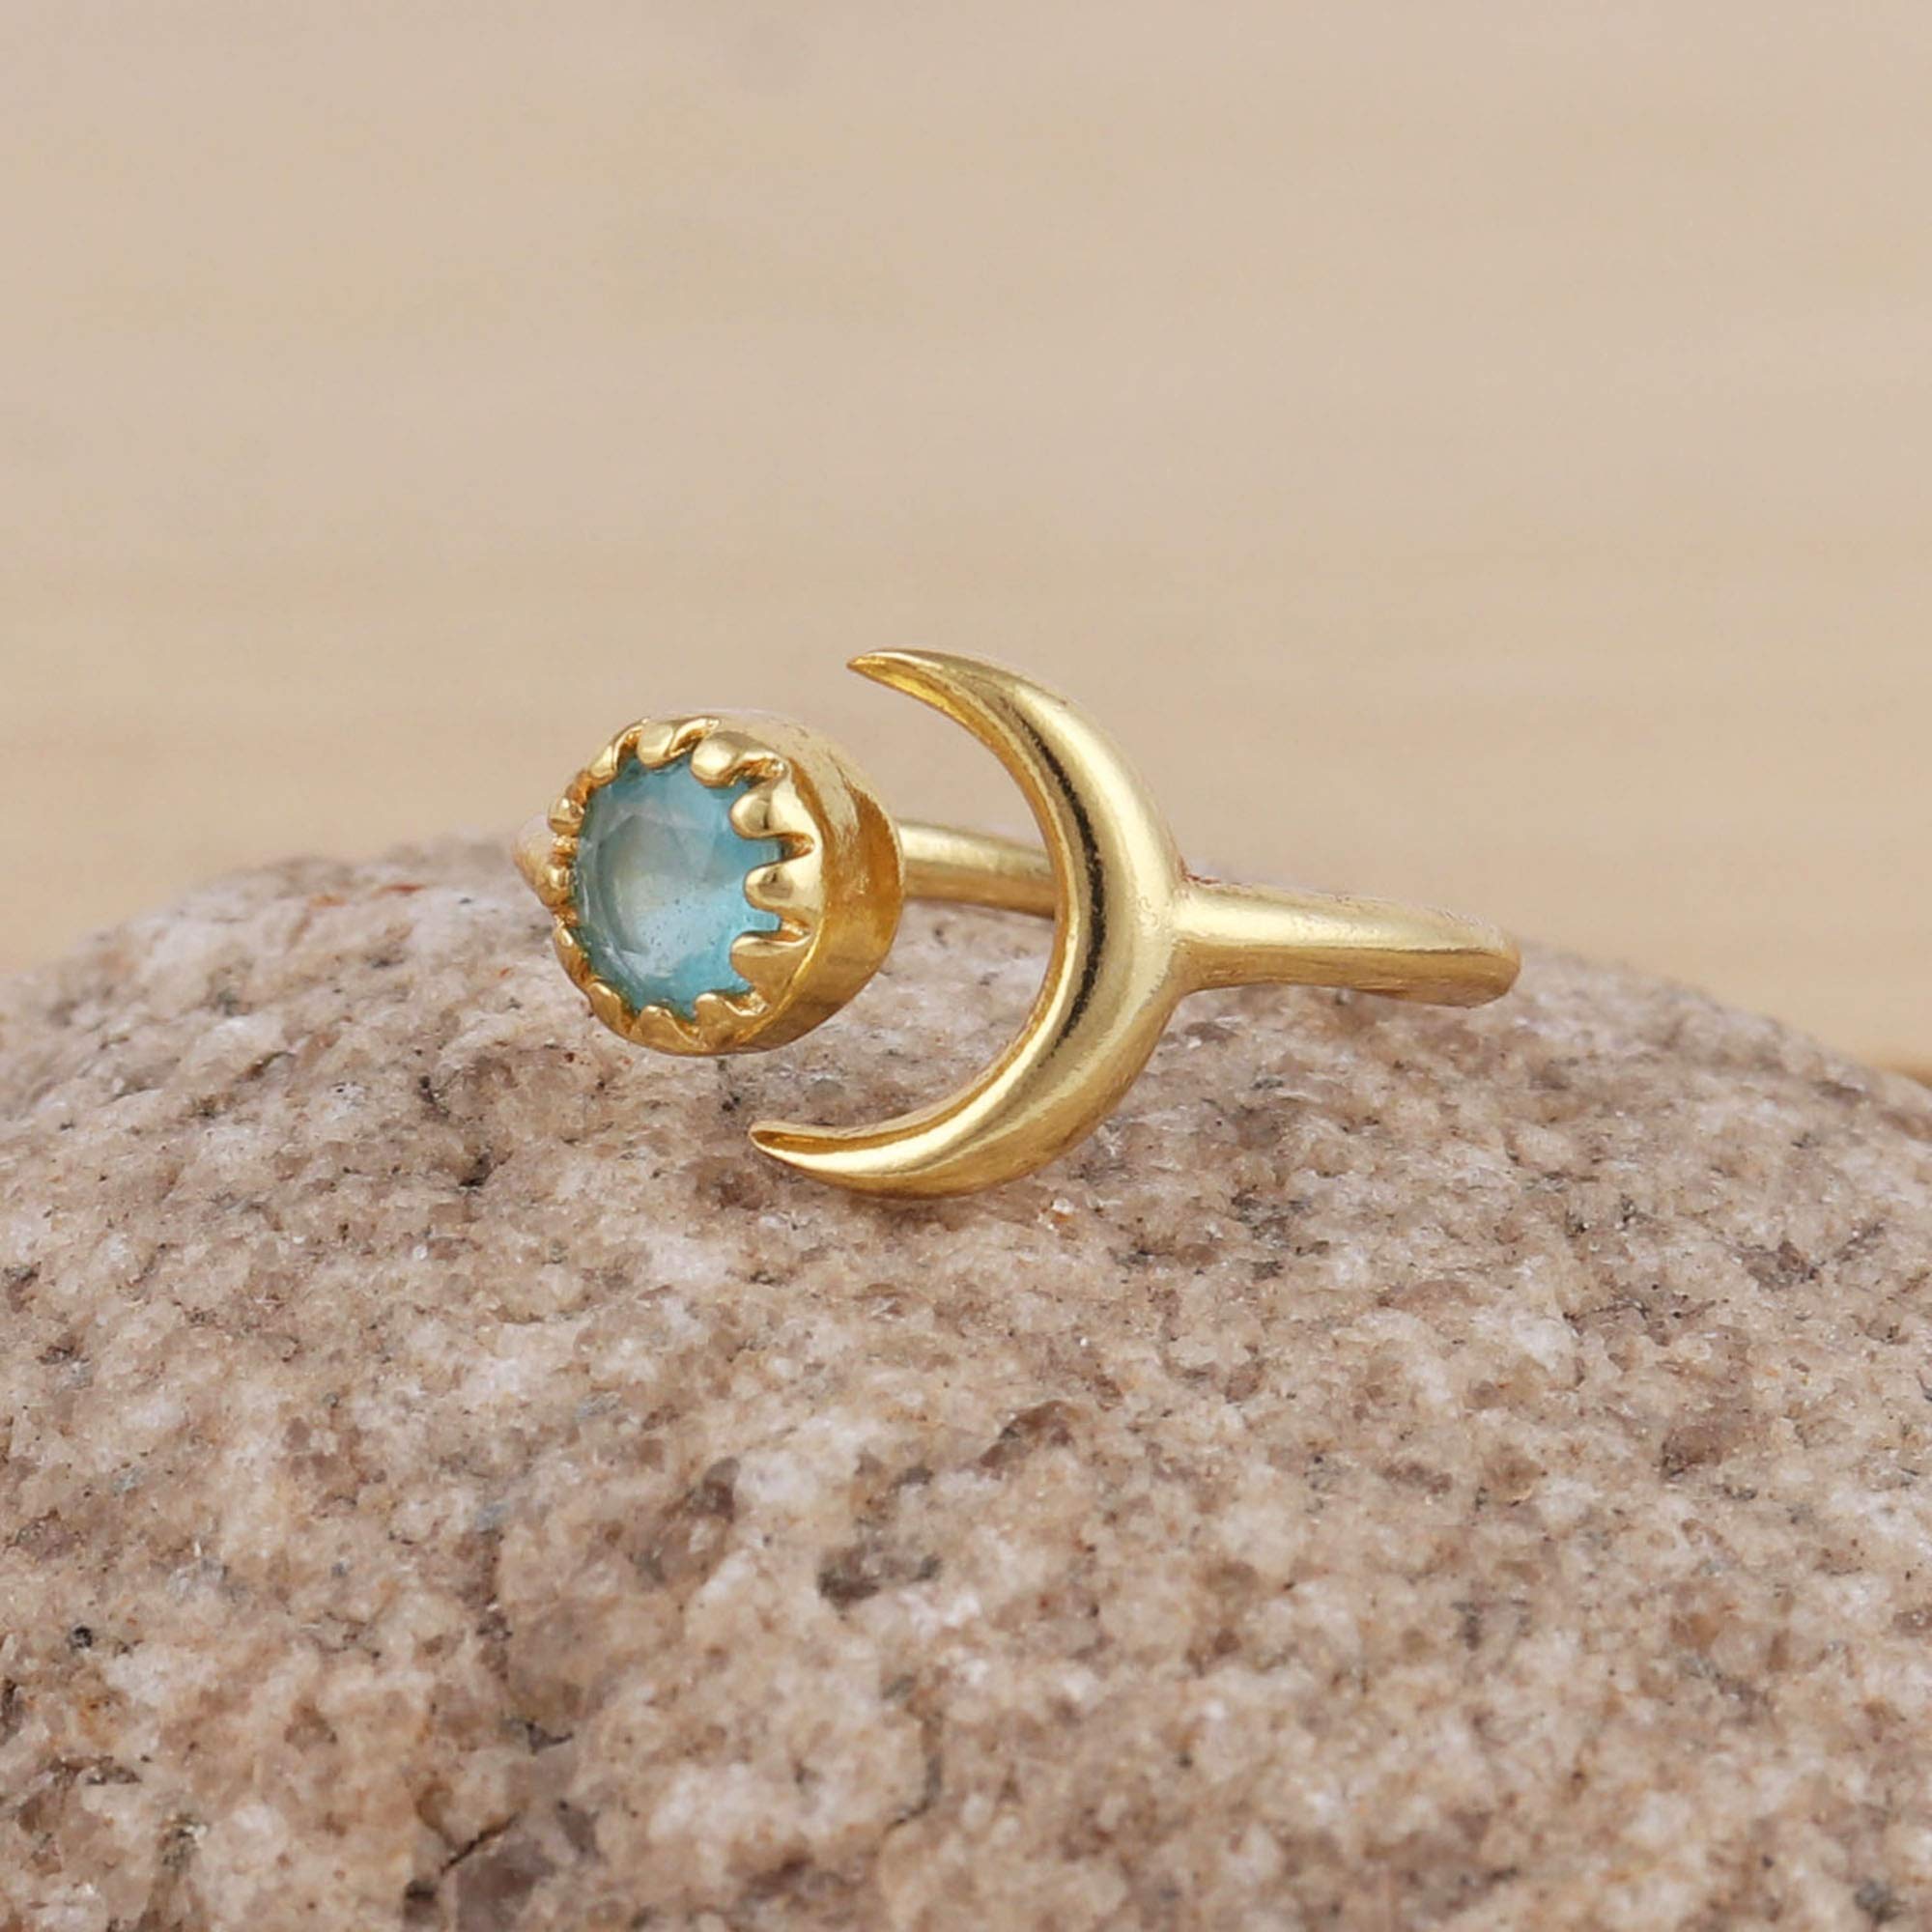 El Joyero Gold Plated Adjustable Ring | Handmade Blue Chalcedony Moon Shape | Gift For Her Ring Jewelry 1056 3F